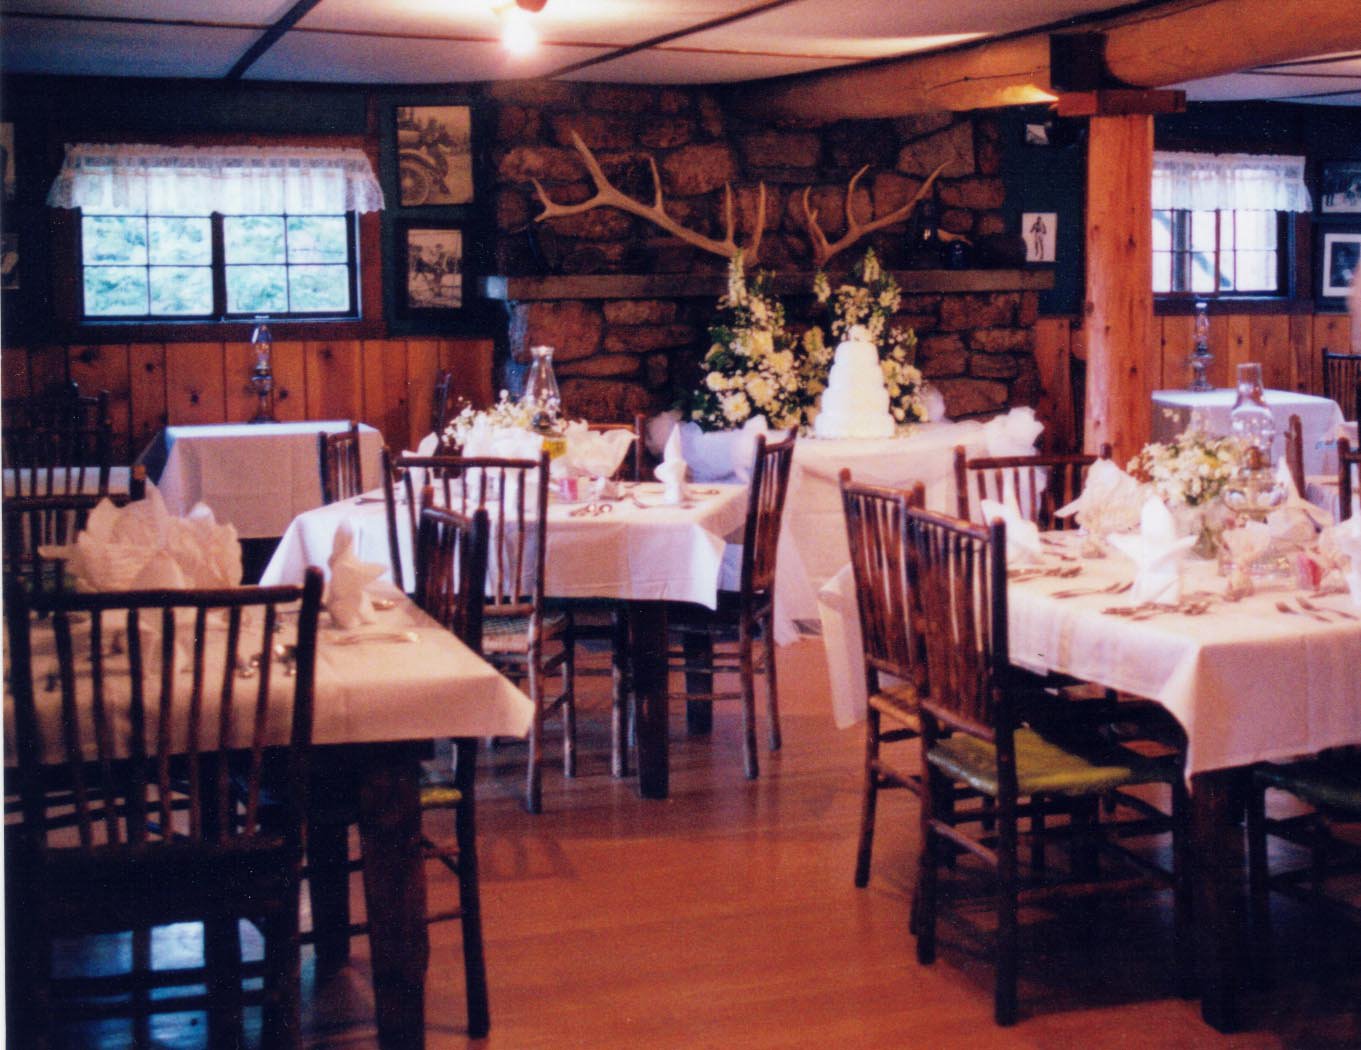 Dining at The Baldpate Inn